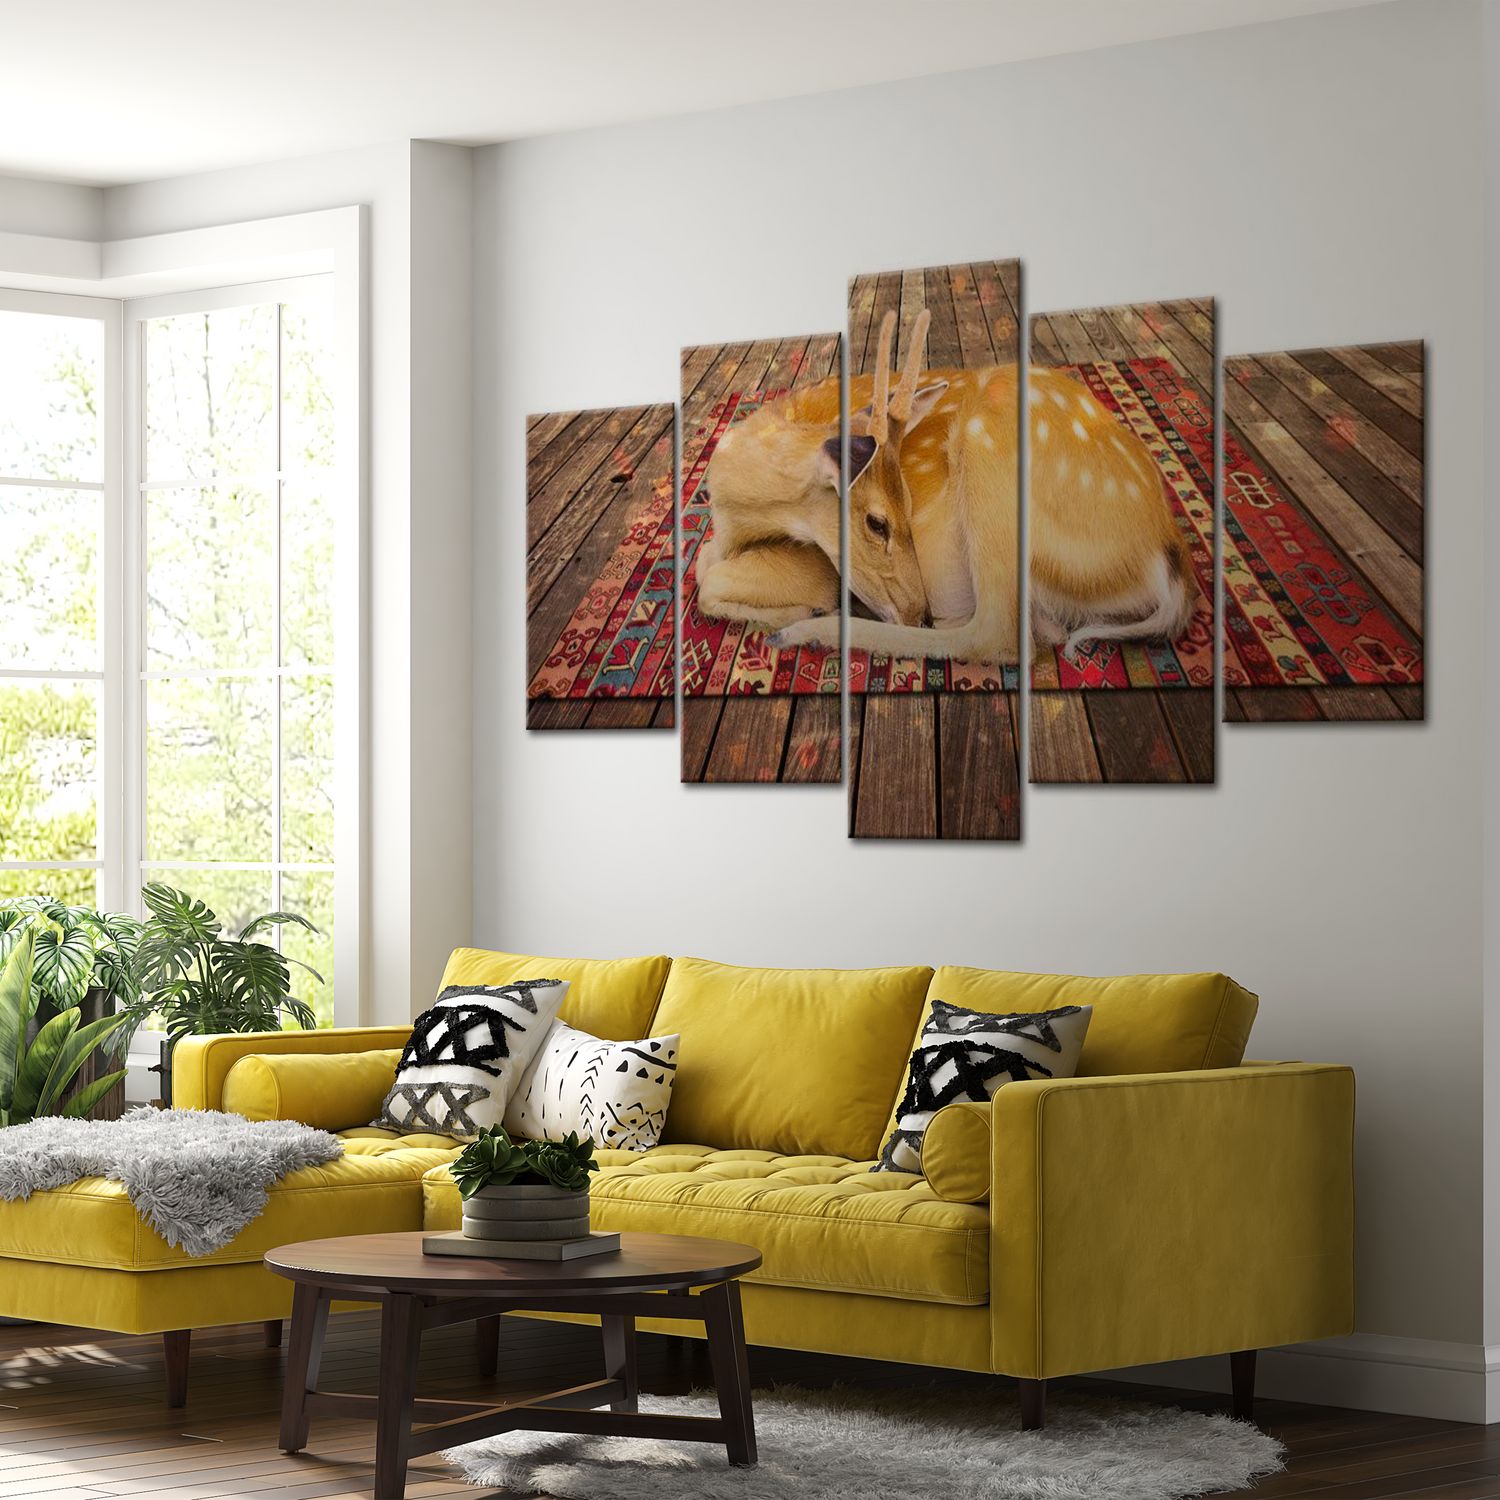 Stretched Canvas Animal Art - Deer On Carpet 40"Wx20"H